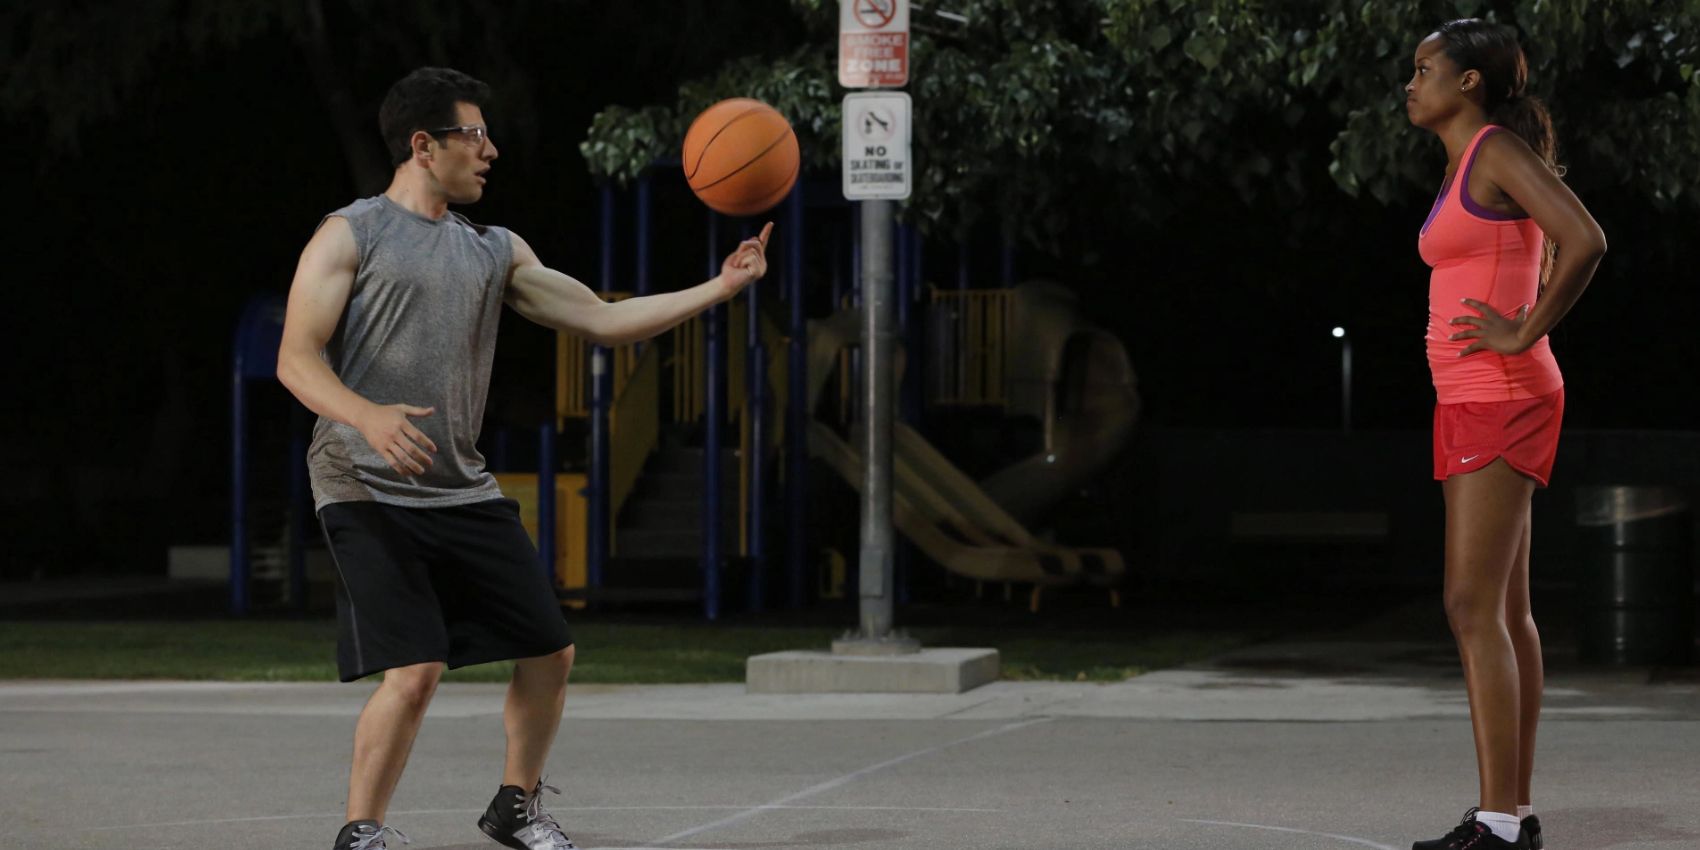 Schmidt tries to spin a basketball while on a court with Winston's sister Katie in New Girl